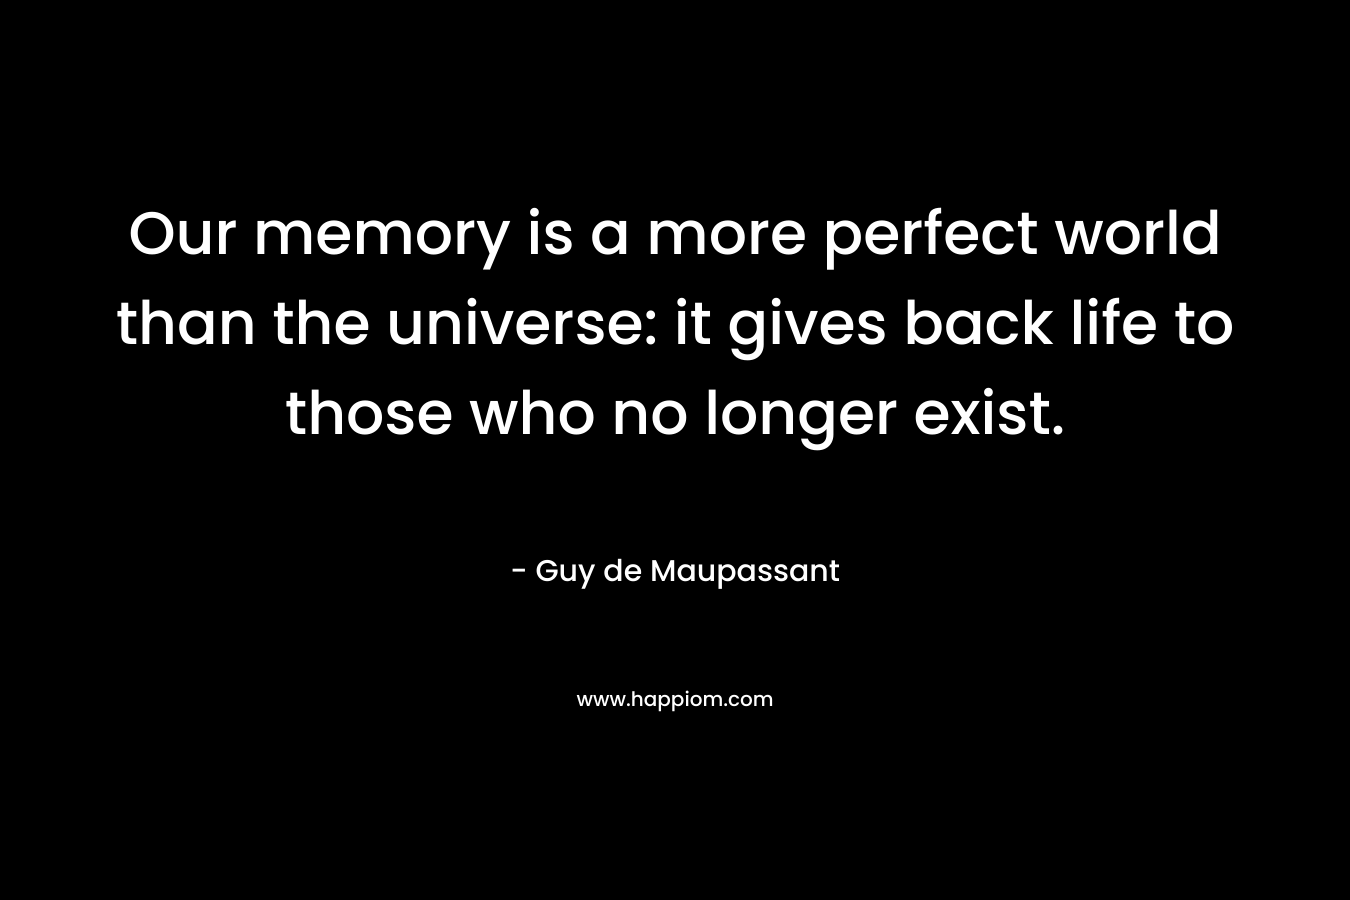 Our memory is a more perfect world than the universe: it gives back life to those who no longer exist. – Guy de Maupassant